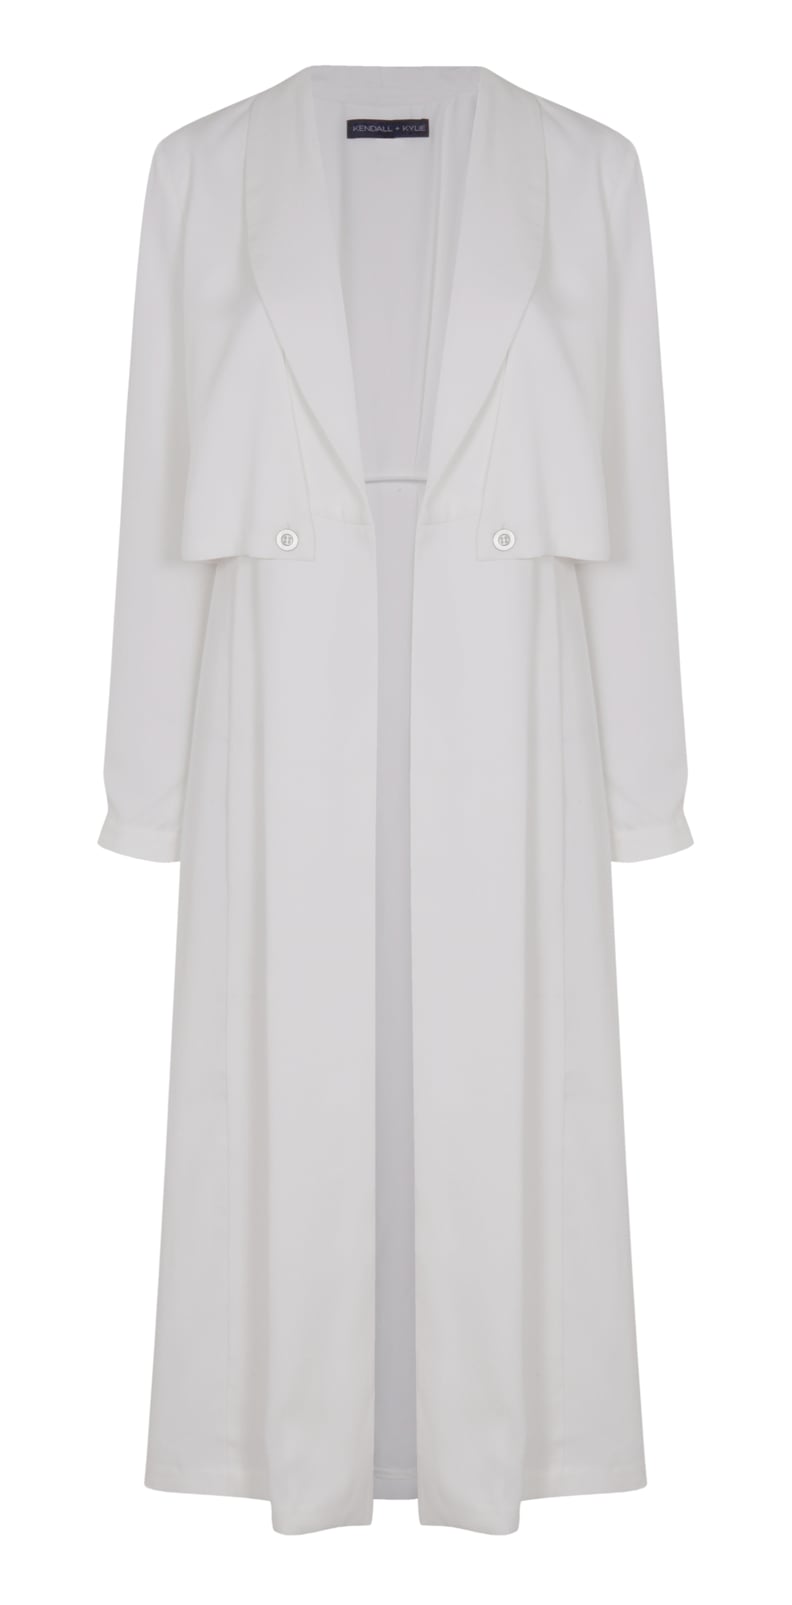 Kendall + Kylie Duster Coat